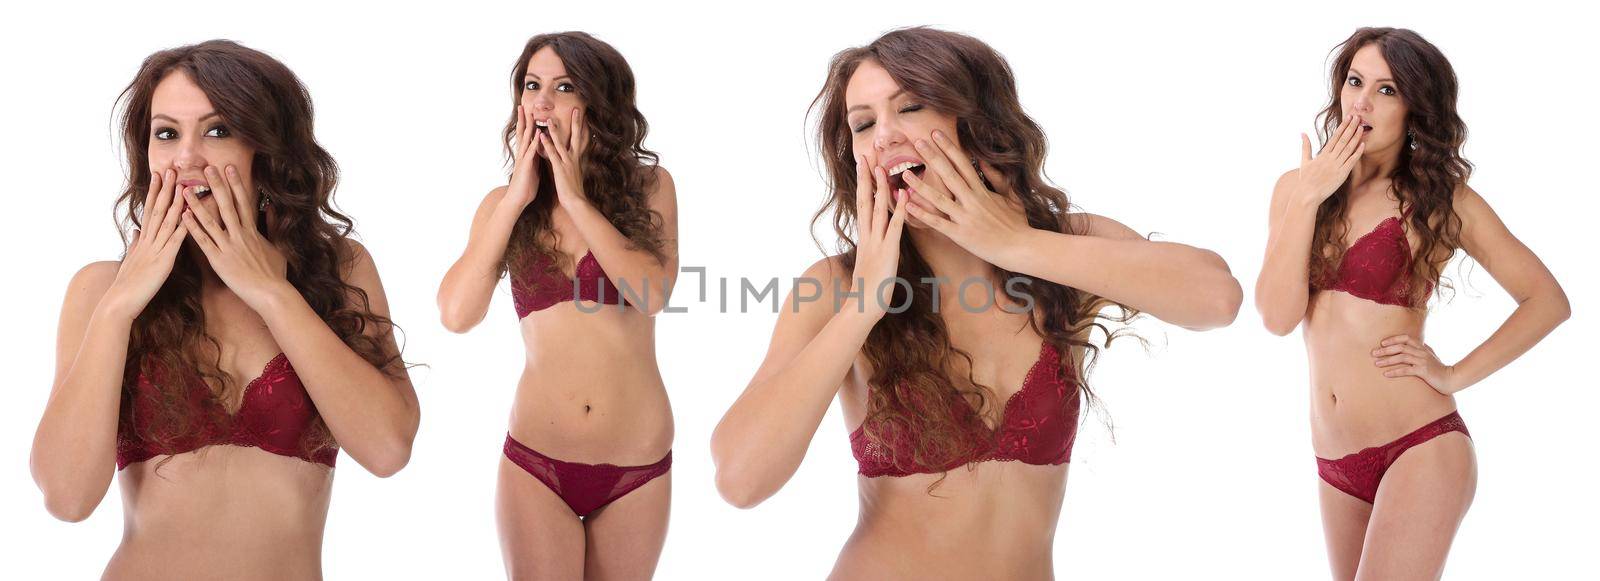 Woman covering her mouth and laughing isolated on white background